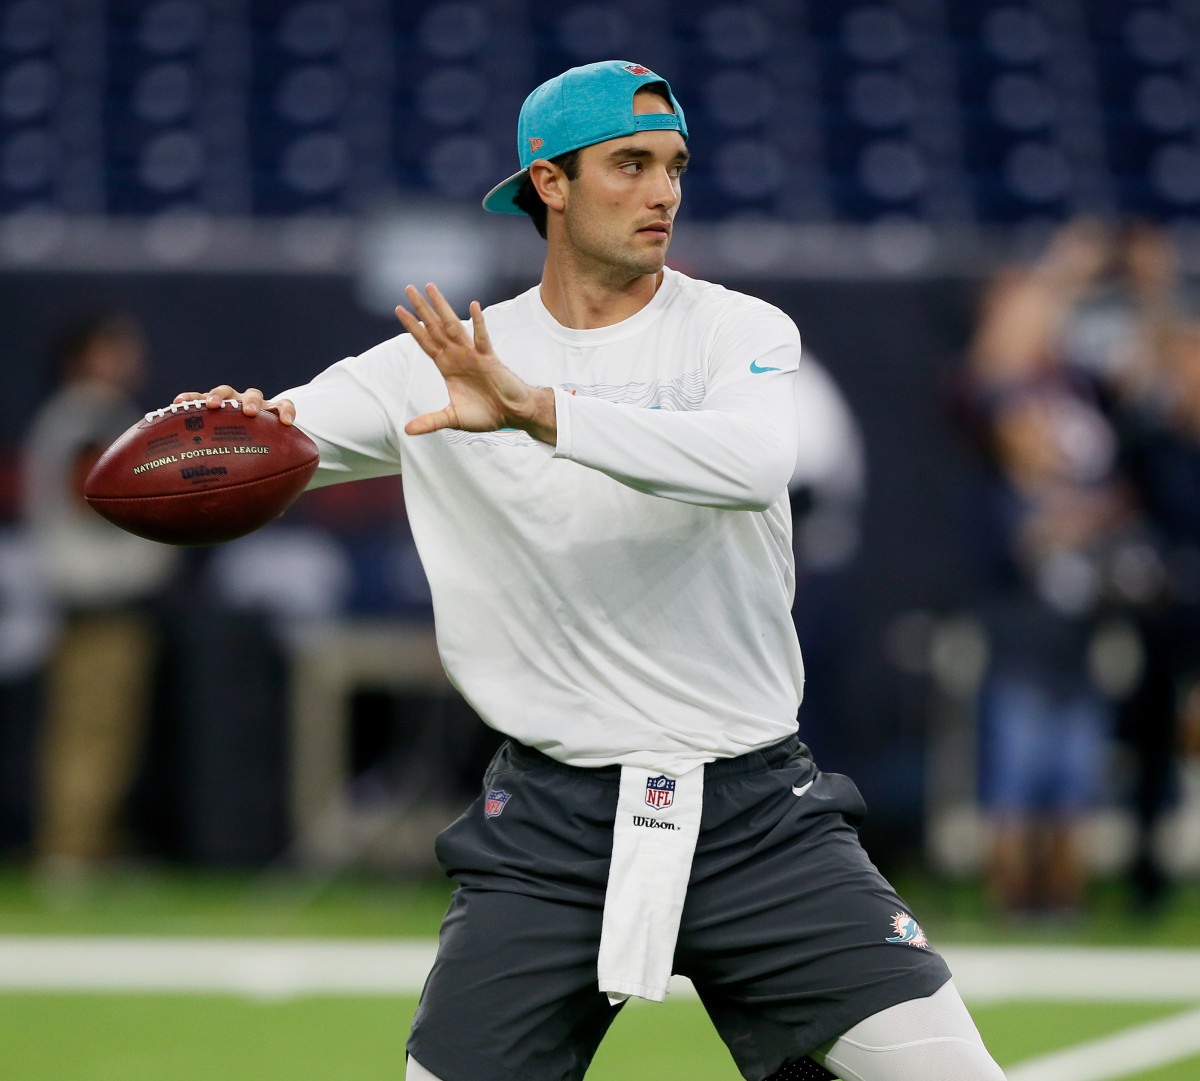 HOUSTON, TX - OCTOBER 25:  Brock Osweiler #8 of the Miami Dolphins warms up before a football game against the Houston Texans at NRG Stadium on October 25, 2018 in Houston, Texas.  (Photo by Bob Levey/Getty Images)